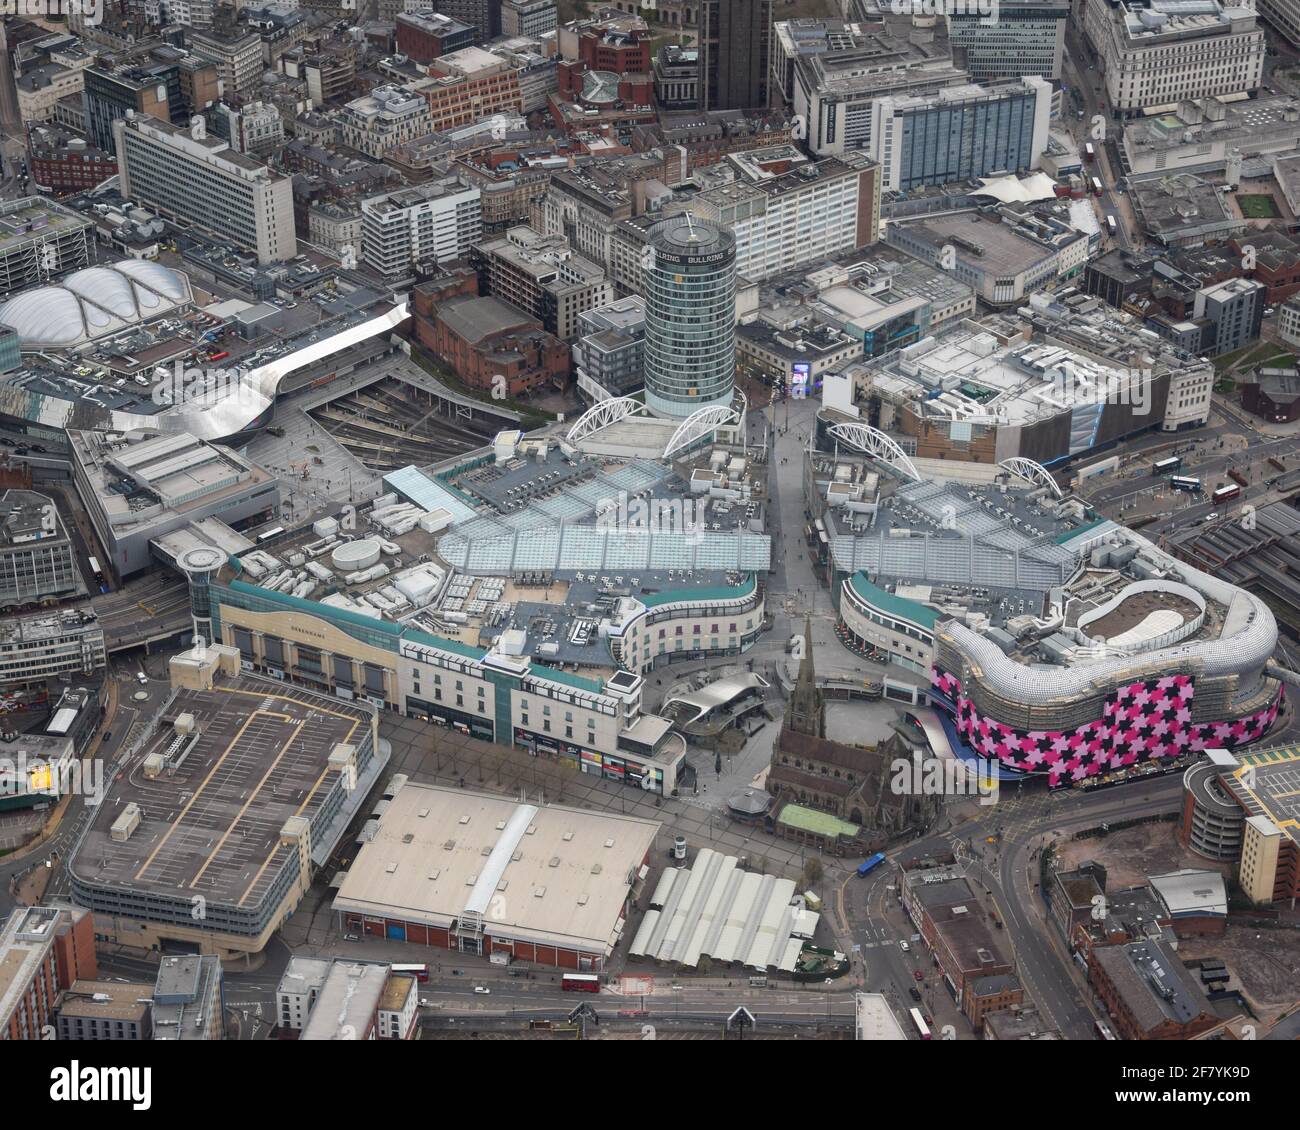 Birmingham City Centre as seen from the Air. Stock Photo